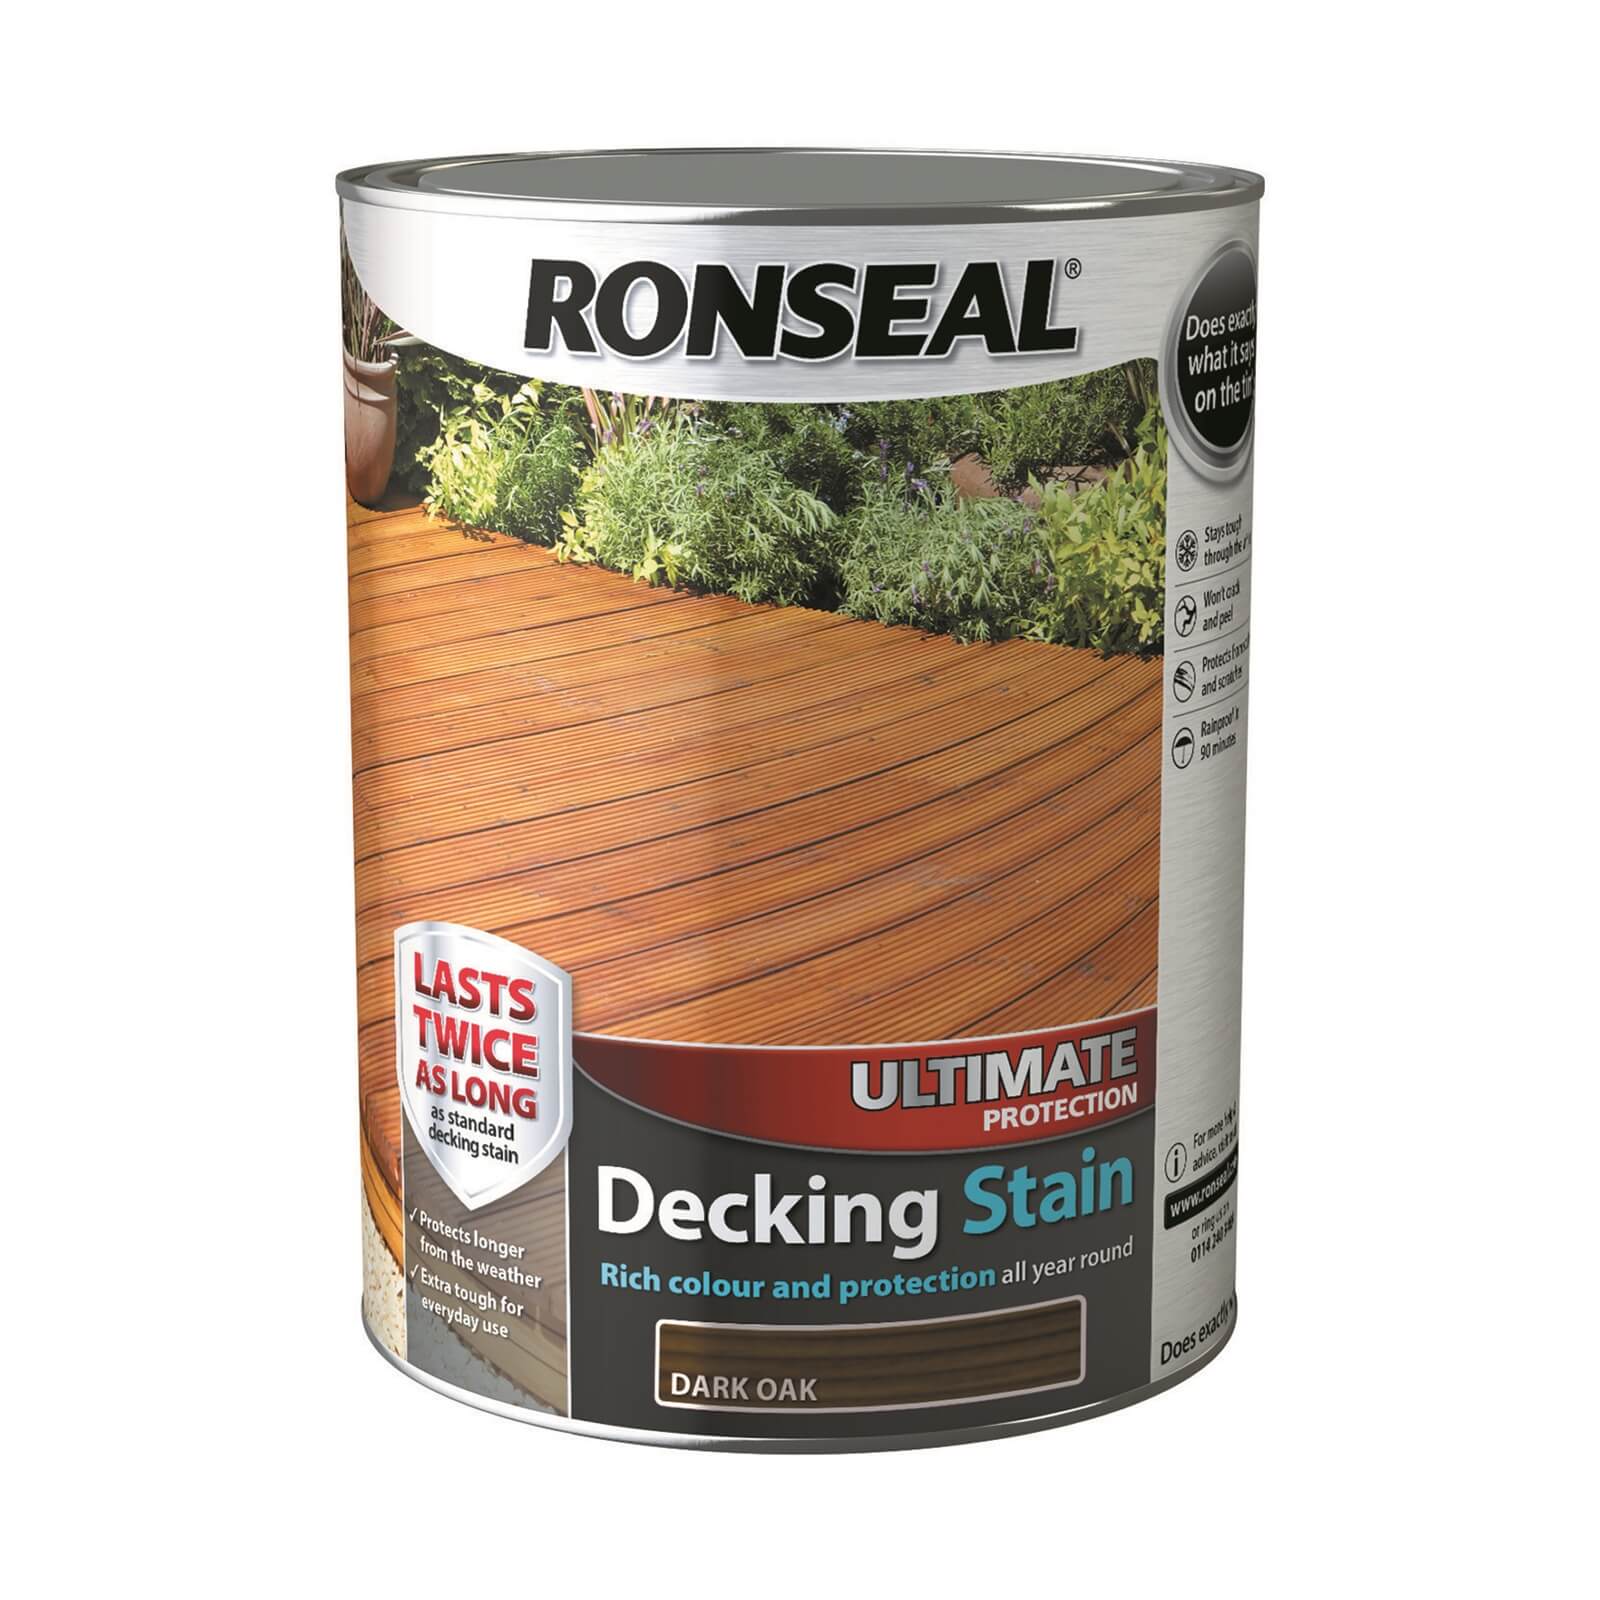 Ronseal Ultimate Protection Decking Stain Dark Oak - 5L